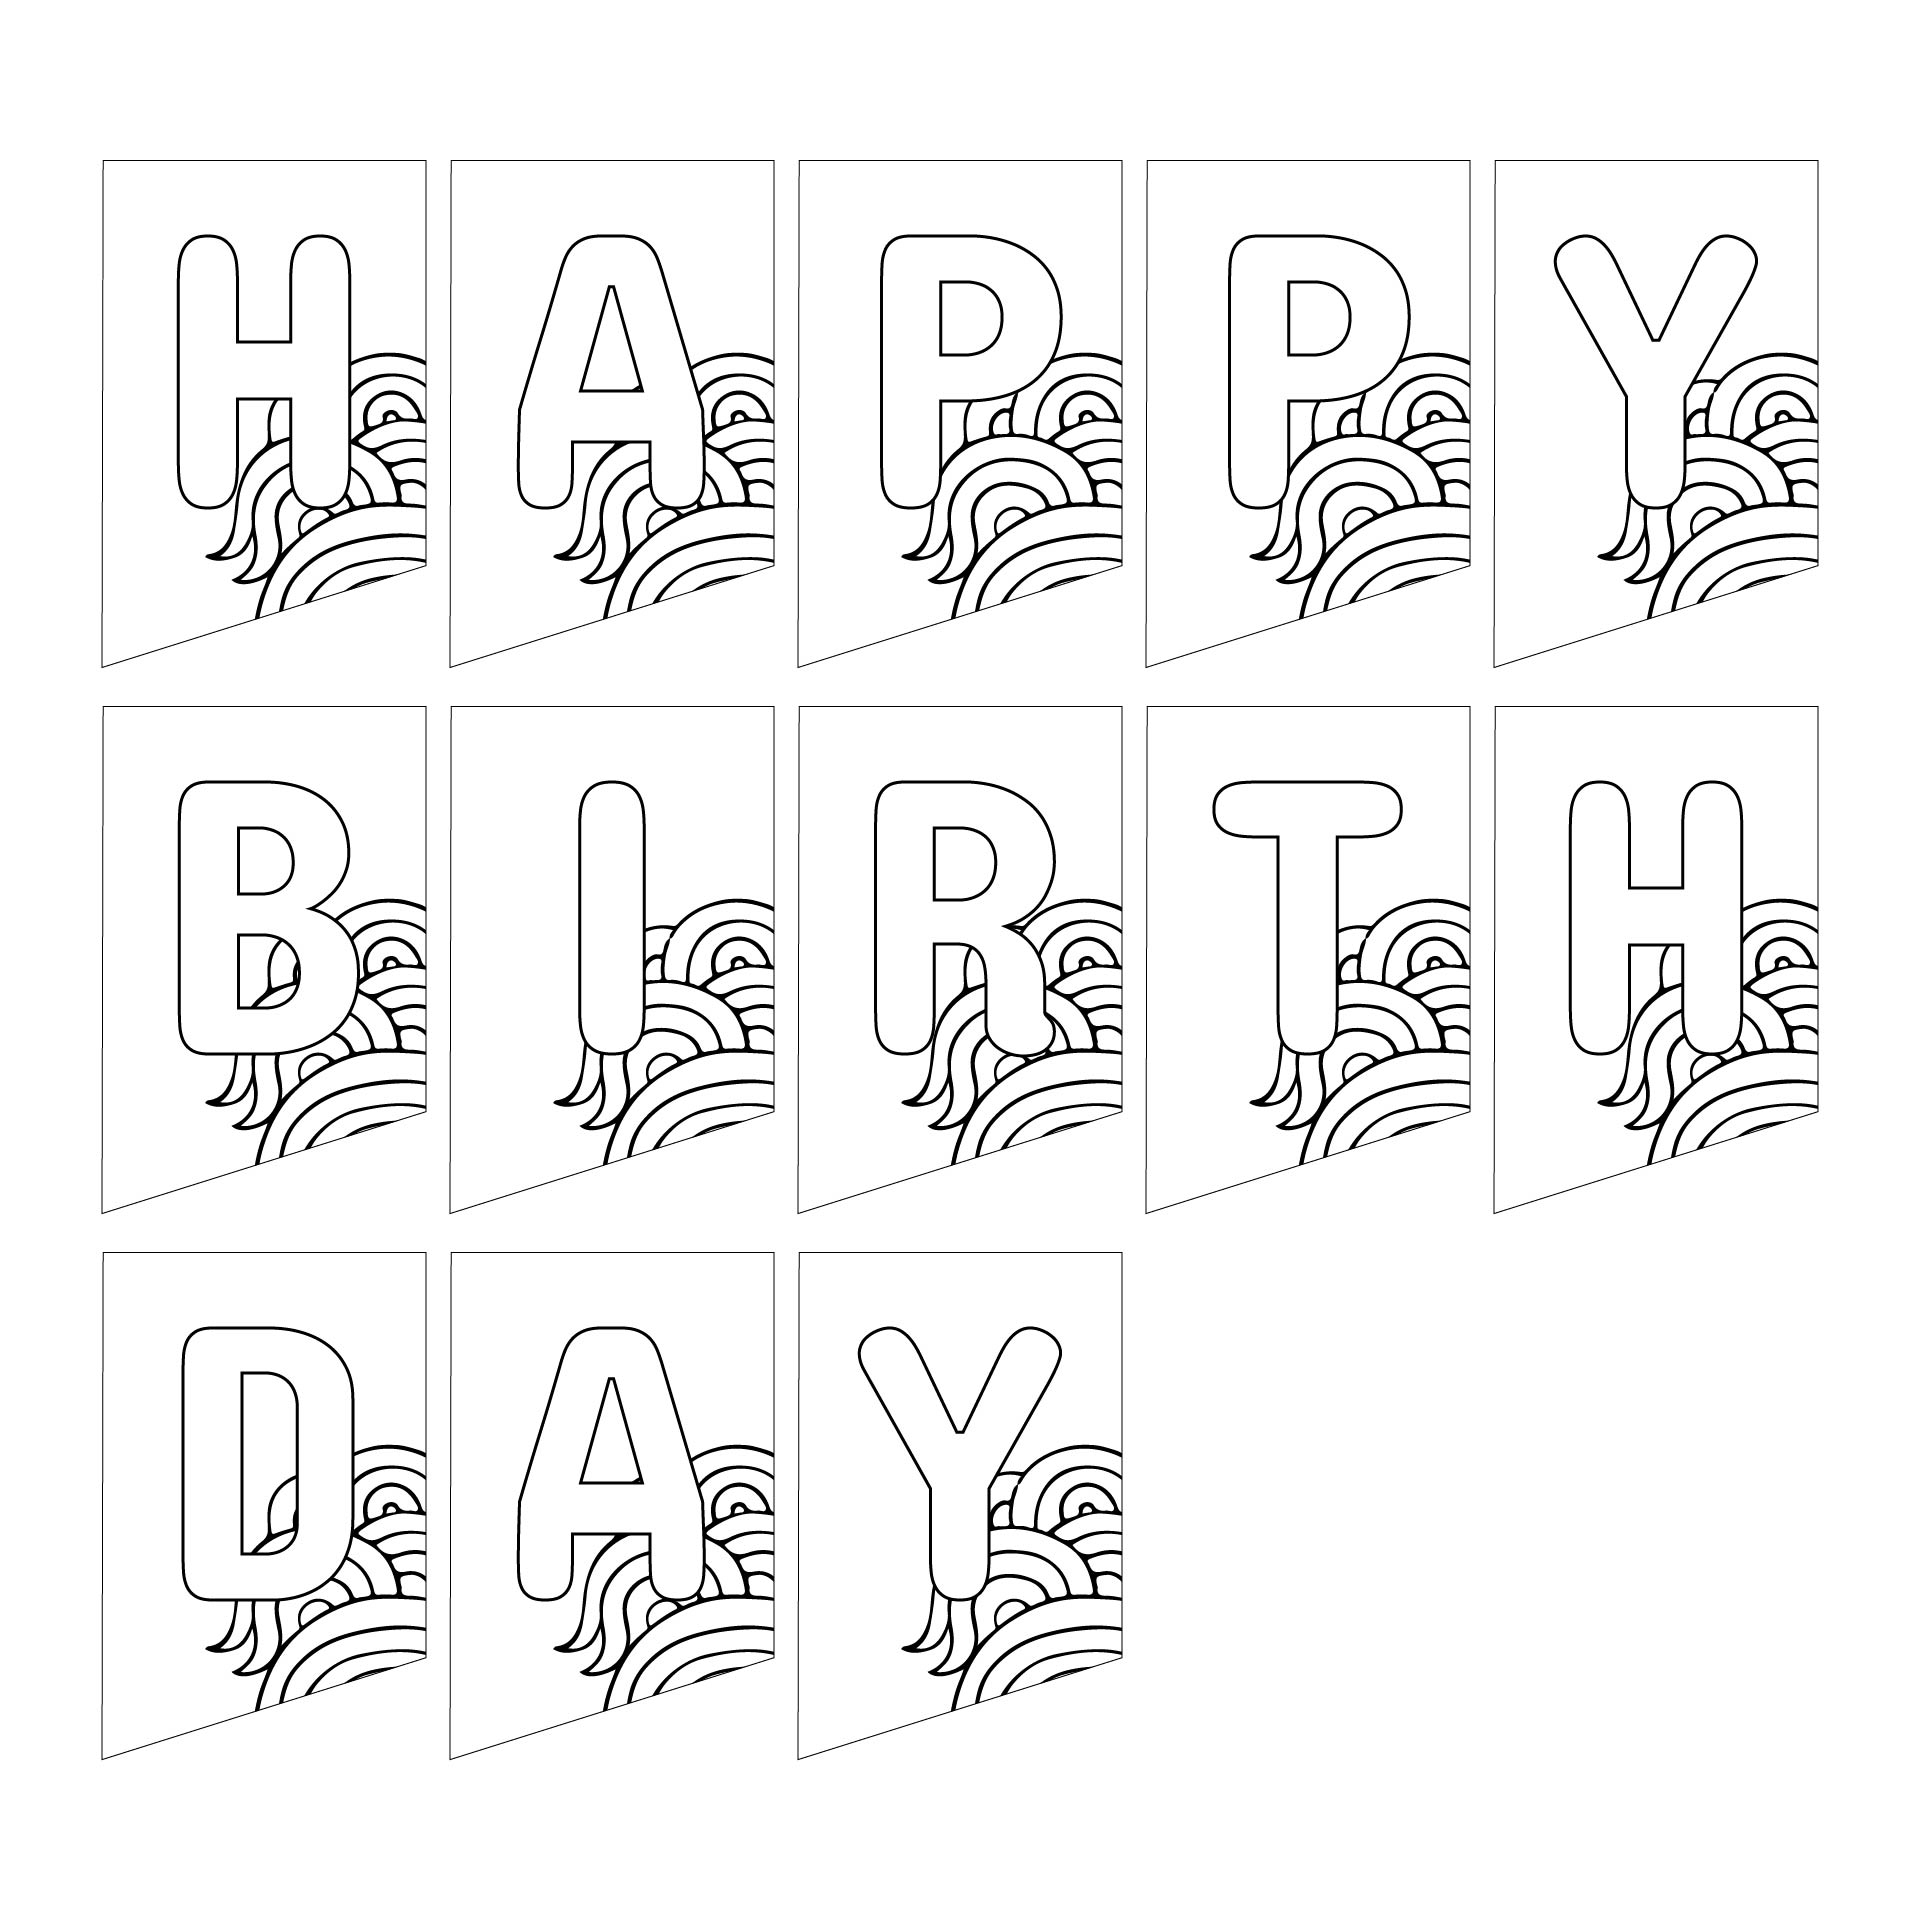 10 Best Images of Happy Birthday Banners Printable Outline Happy